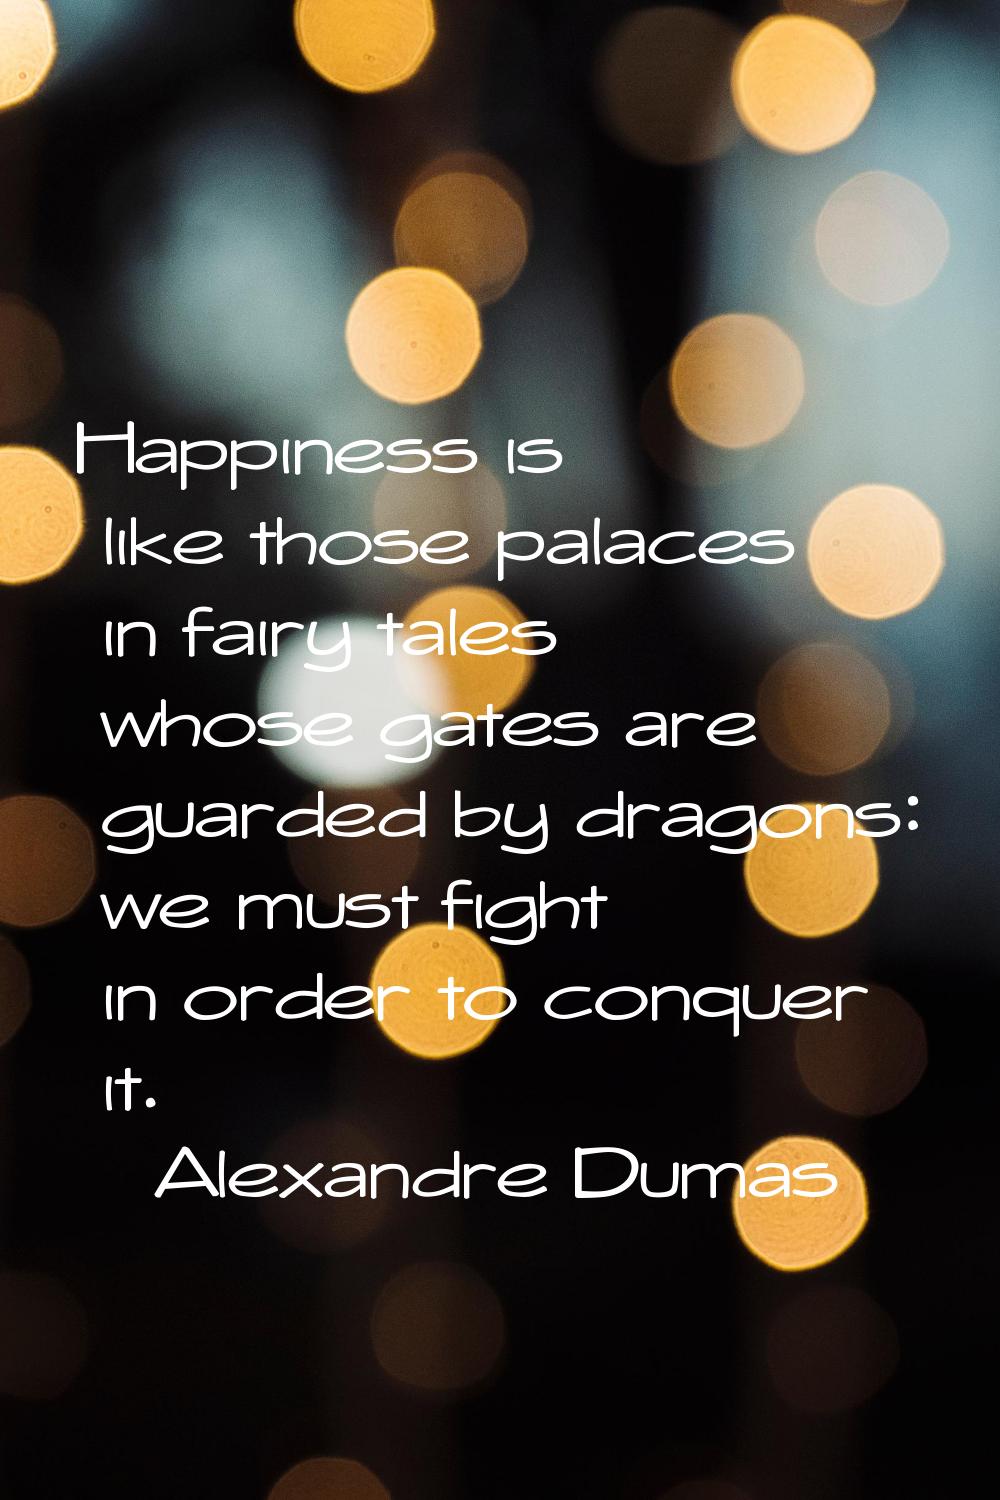 Happiness is like those palaces in fairy tales whose gates are guarded by dragons: we must fight in